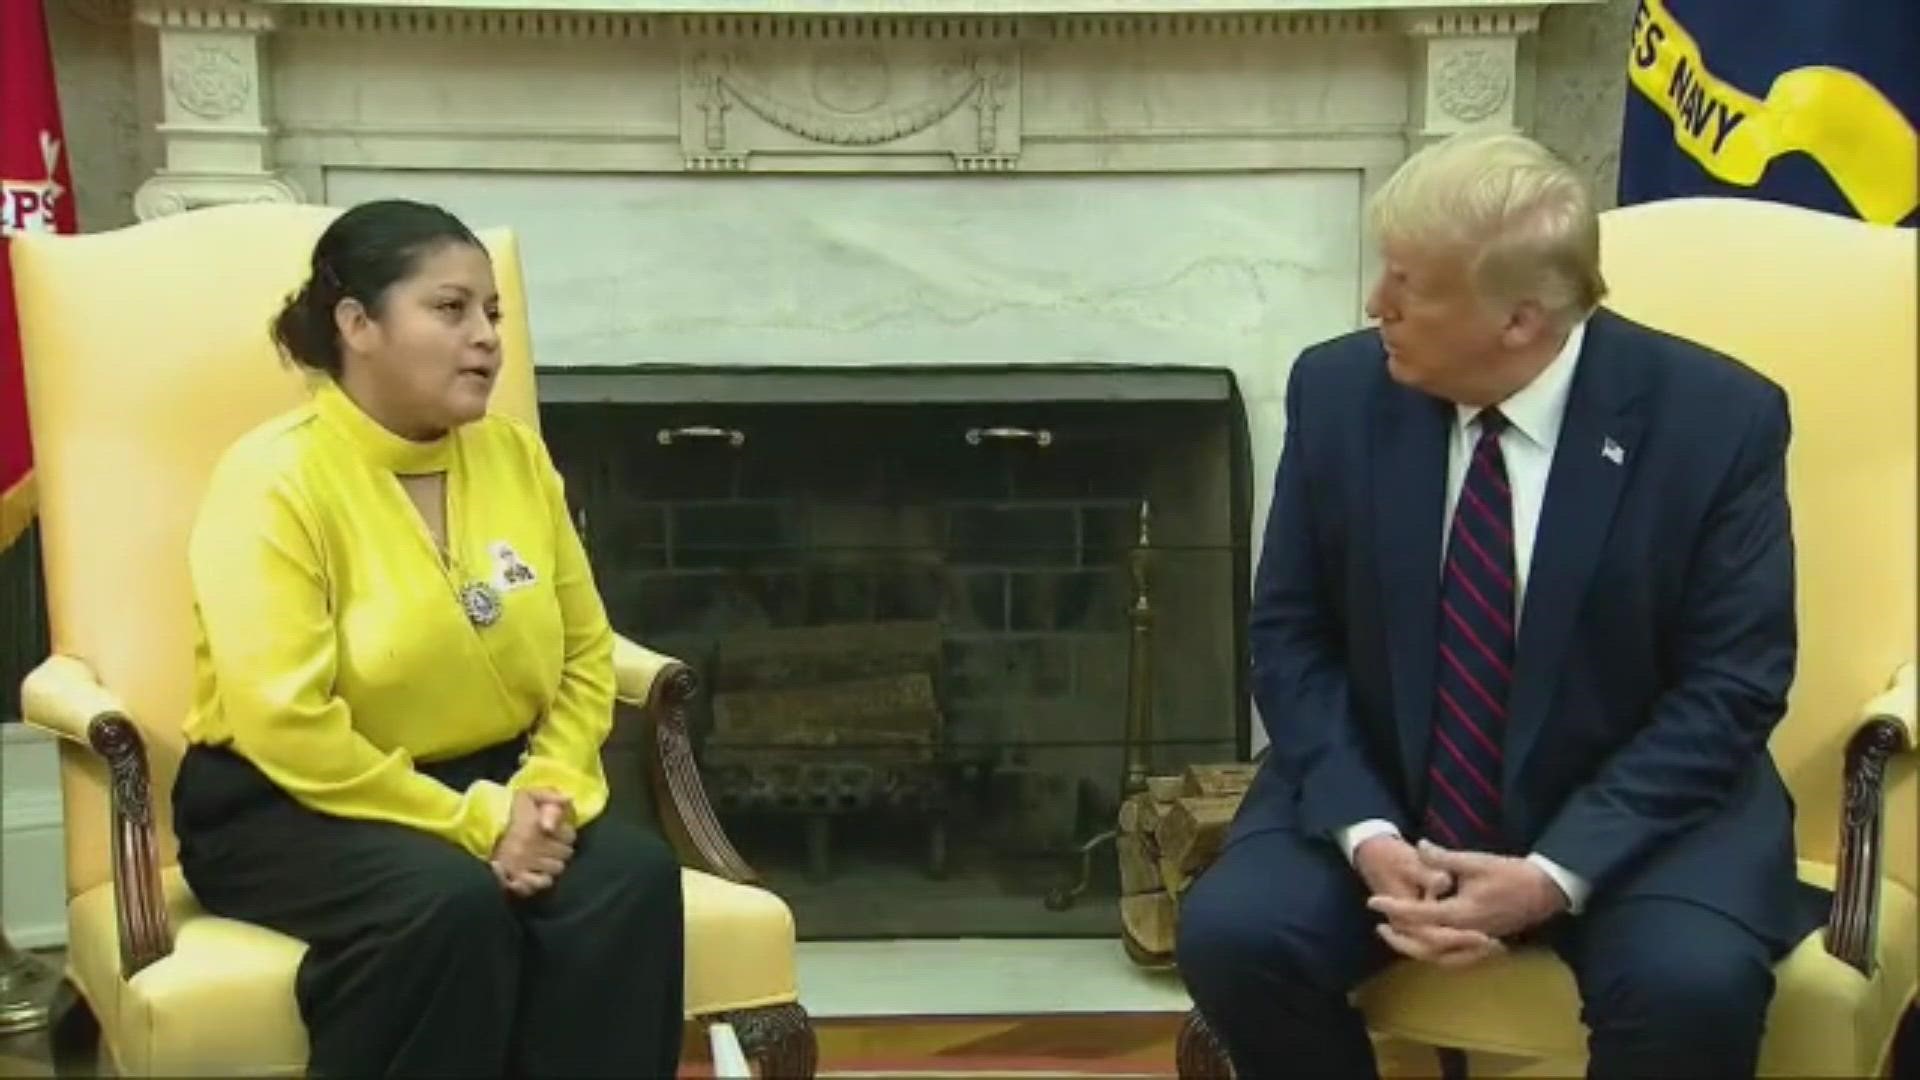 With their attorney, the family of Vanessa Guillen met with President Trump at the White House on Thursday, July 30.